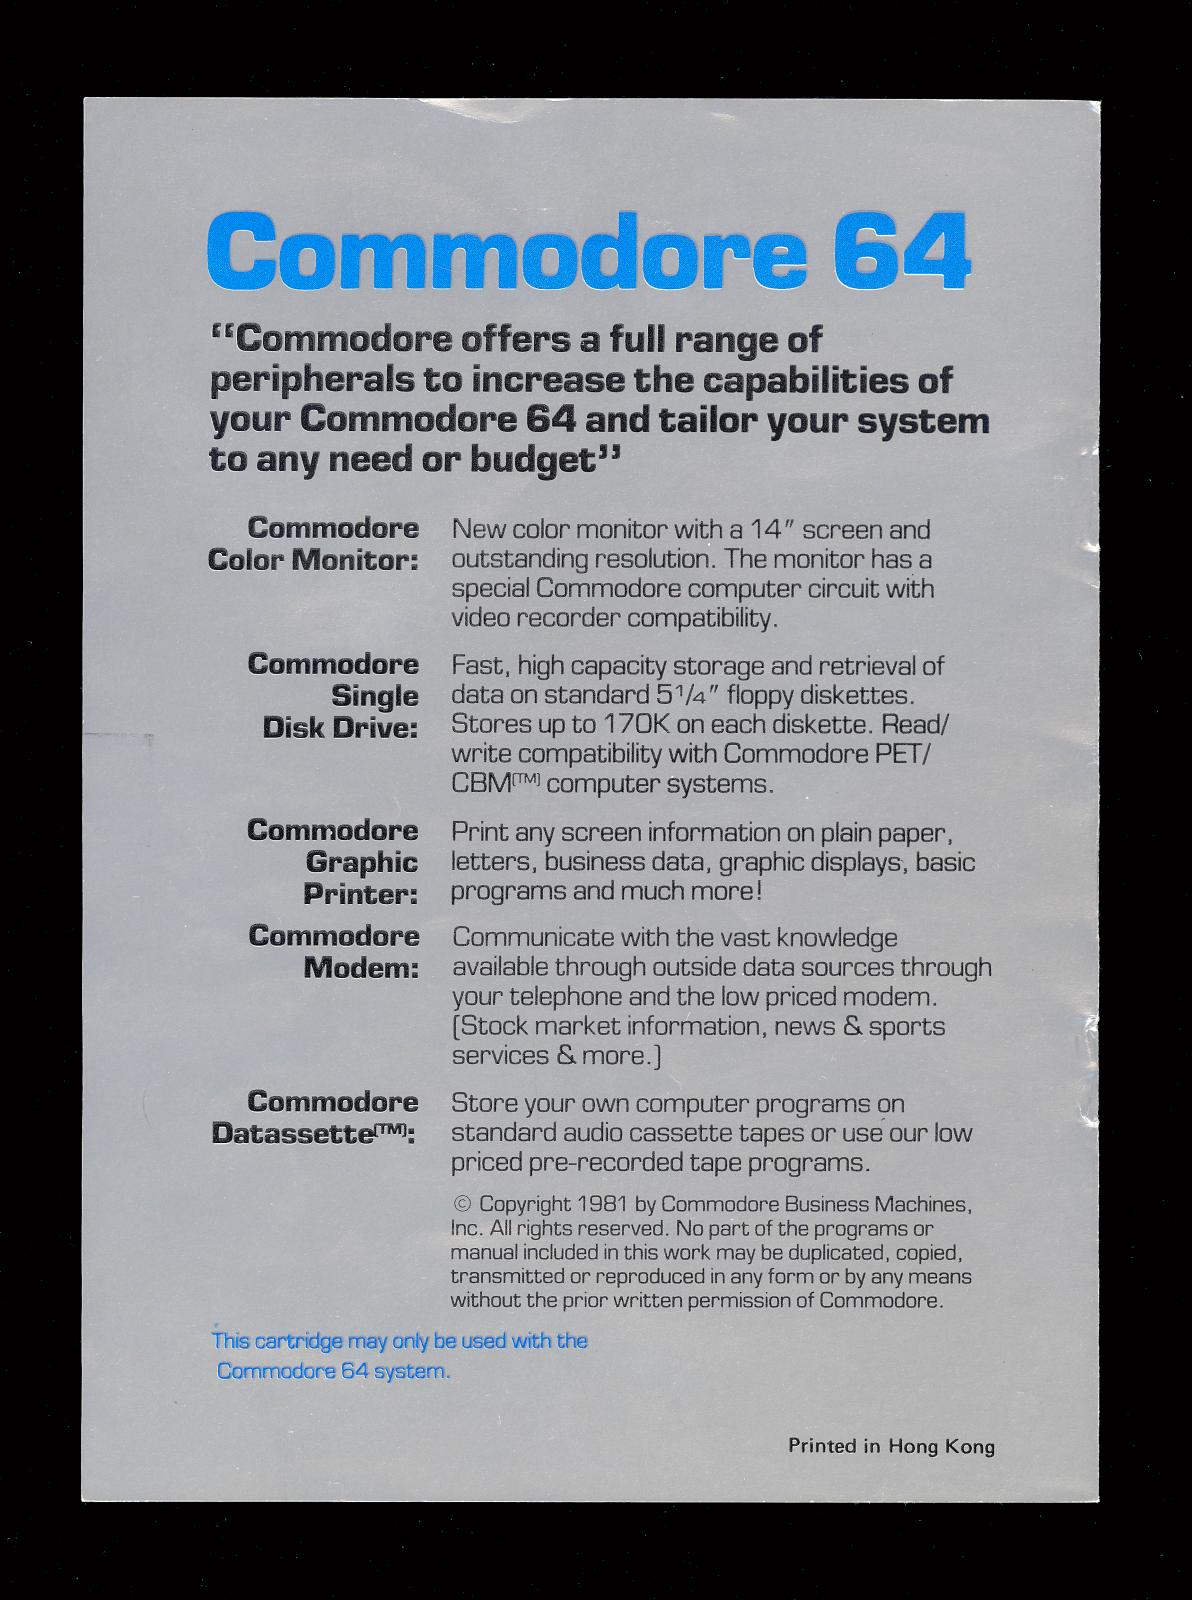 Back cover of the Music Machine Instruction book. The page is silver coloured with the text "Commodore 64" printed in blue at the top. Below this, printed in black text are advertising pieces for new accessories for the Commodore 64